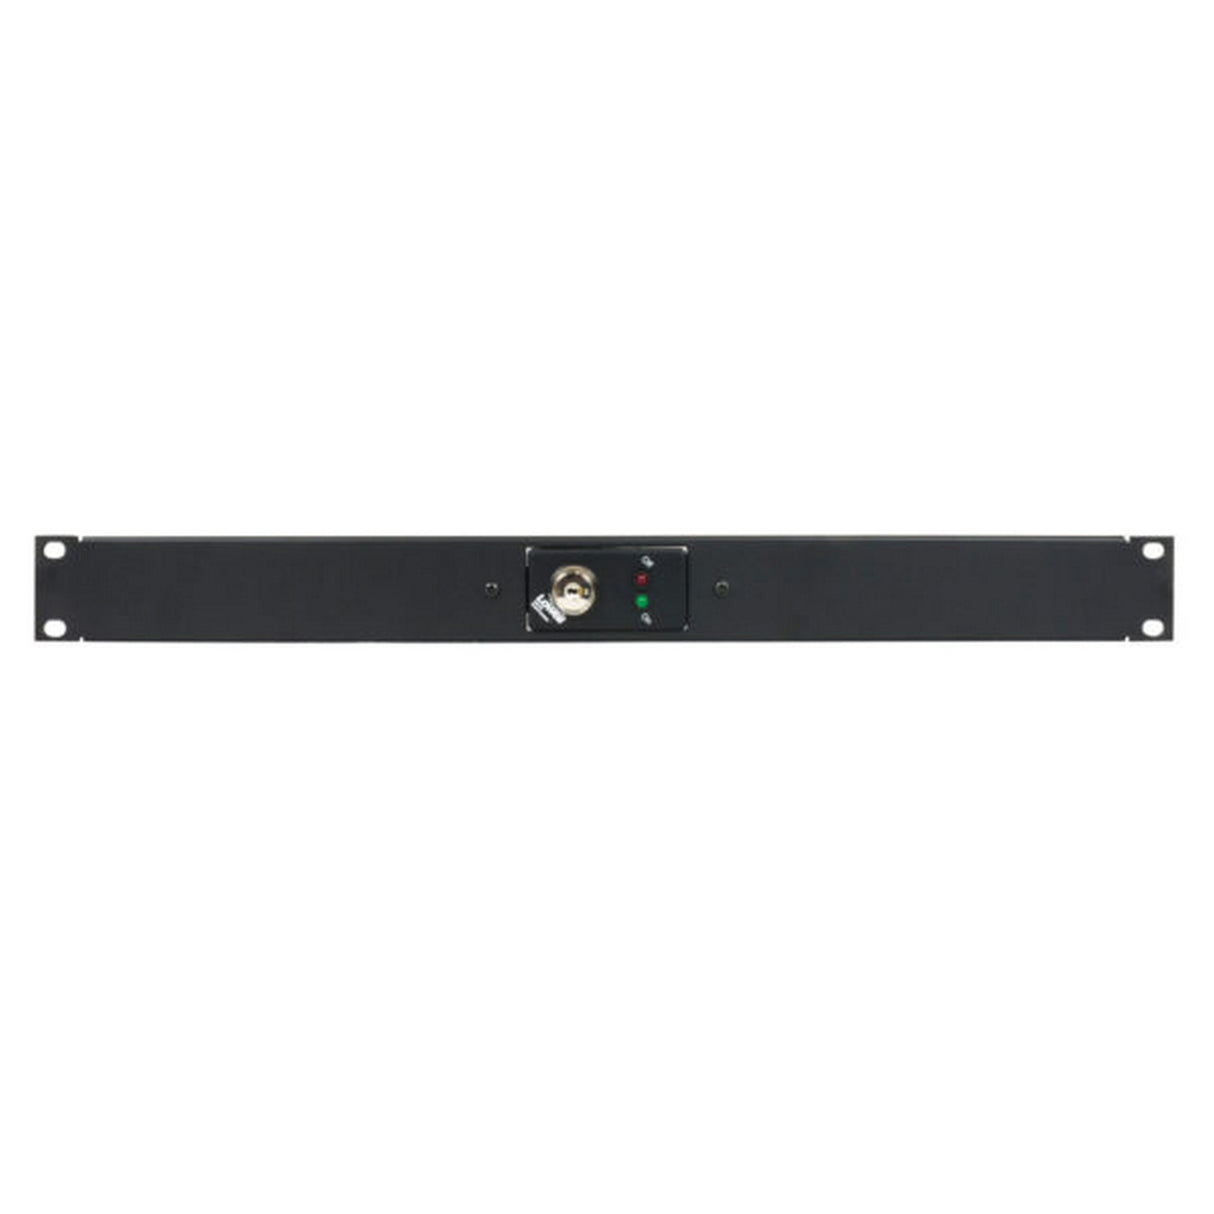 Lowell RPSB2-MKR-RJ Momentary Single Pole Single Throw Low-Voltage Rackmount Switch with RJ45 Connector